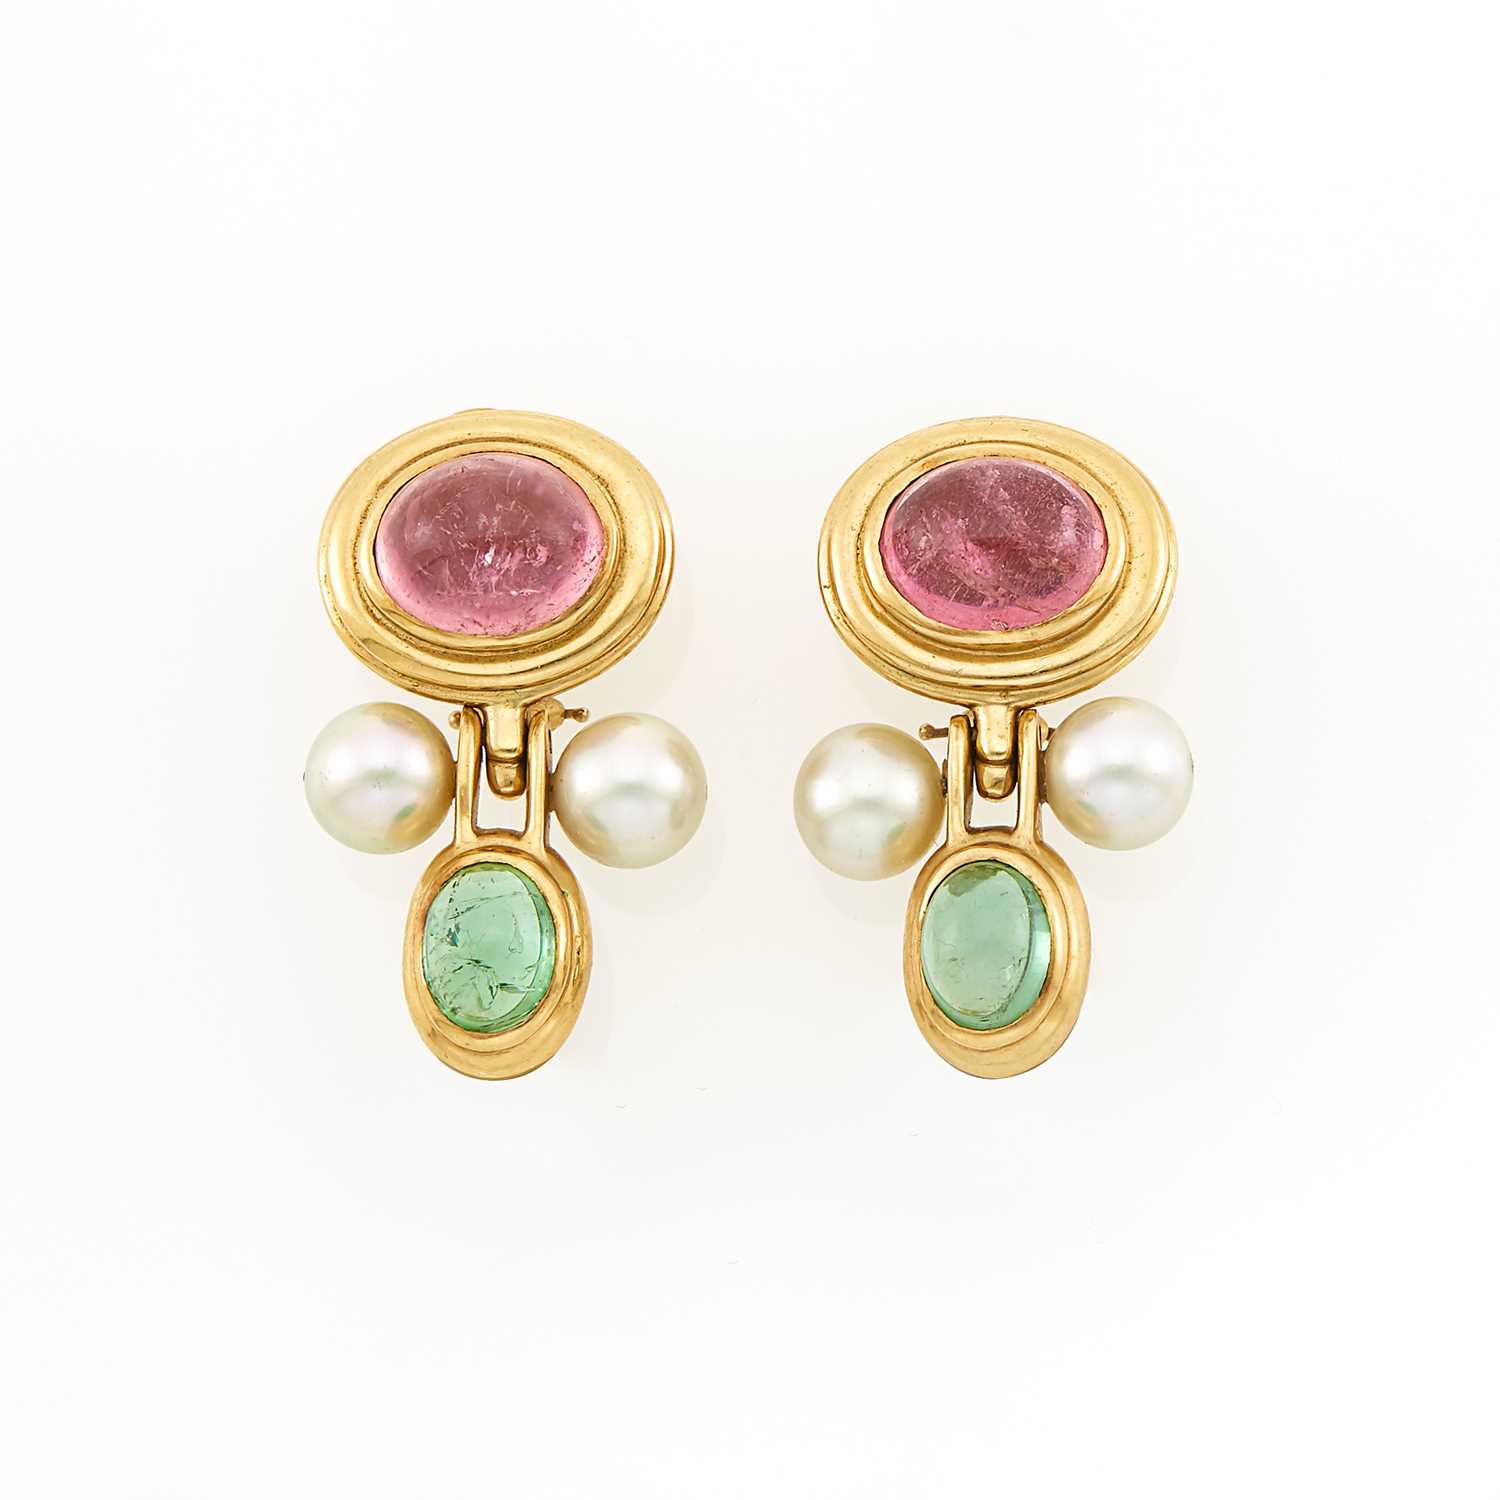 Lot 1057 - Pair of Gold, Cabochon Pink and Green Tourmaline and Cultured Pearl Earclips